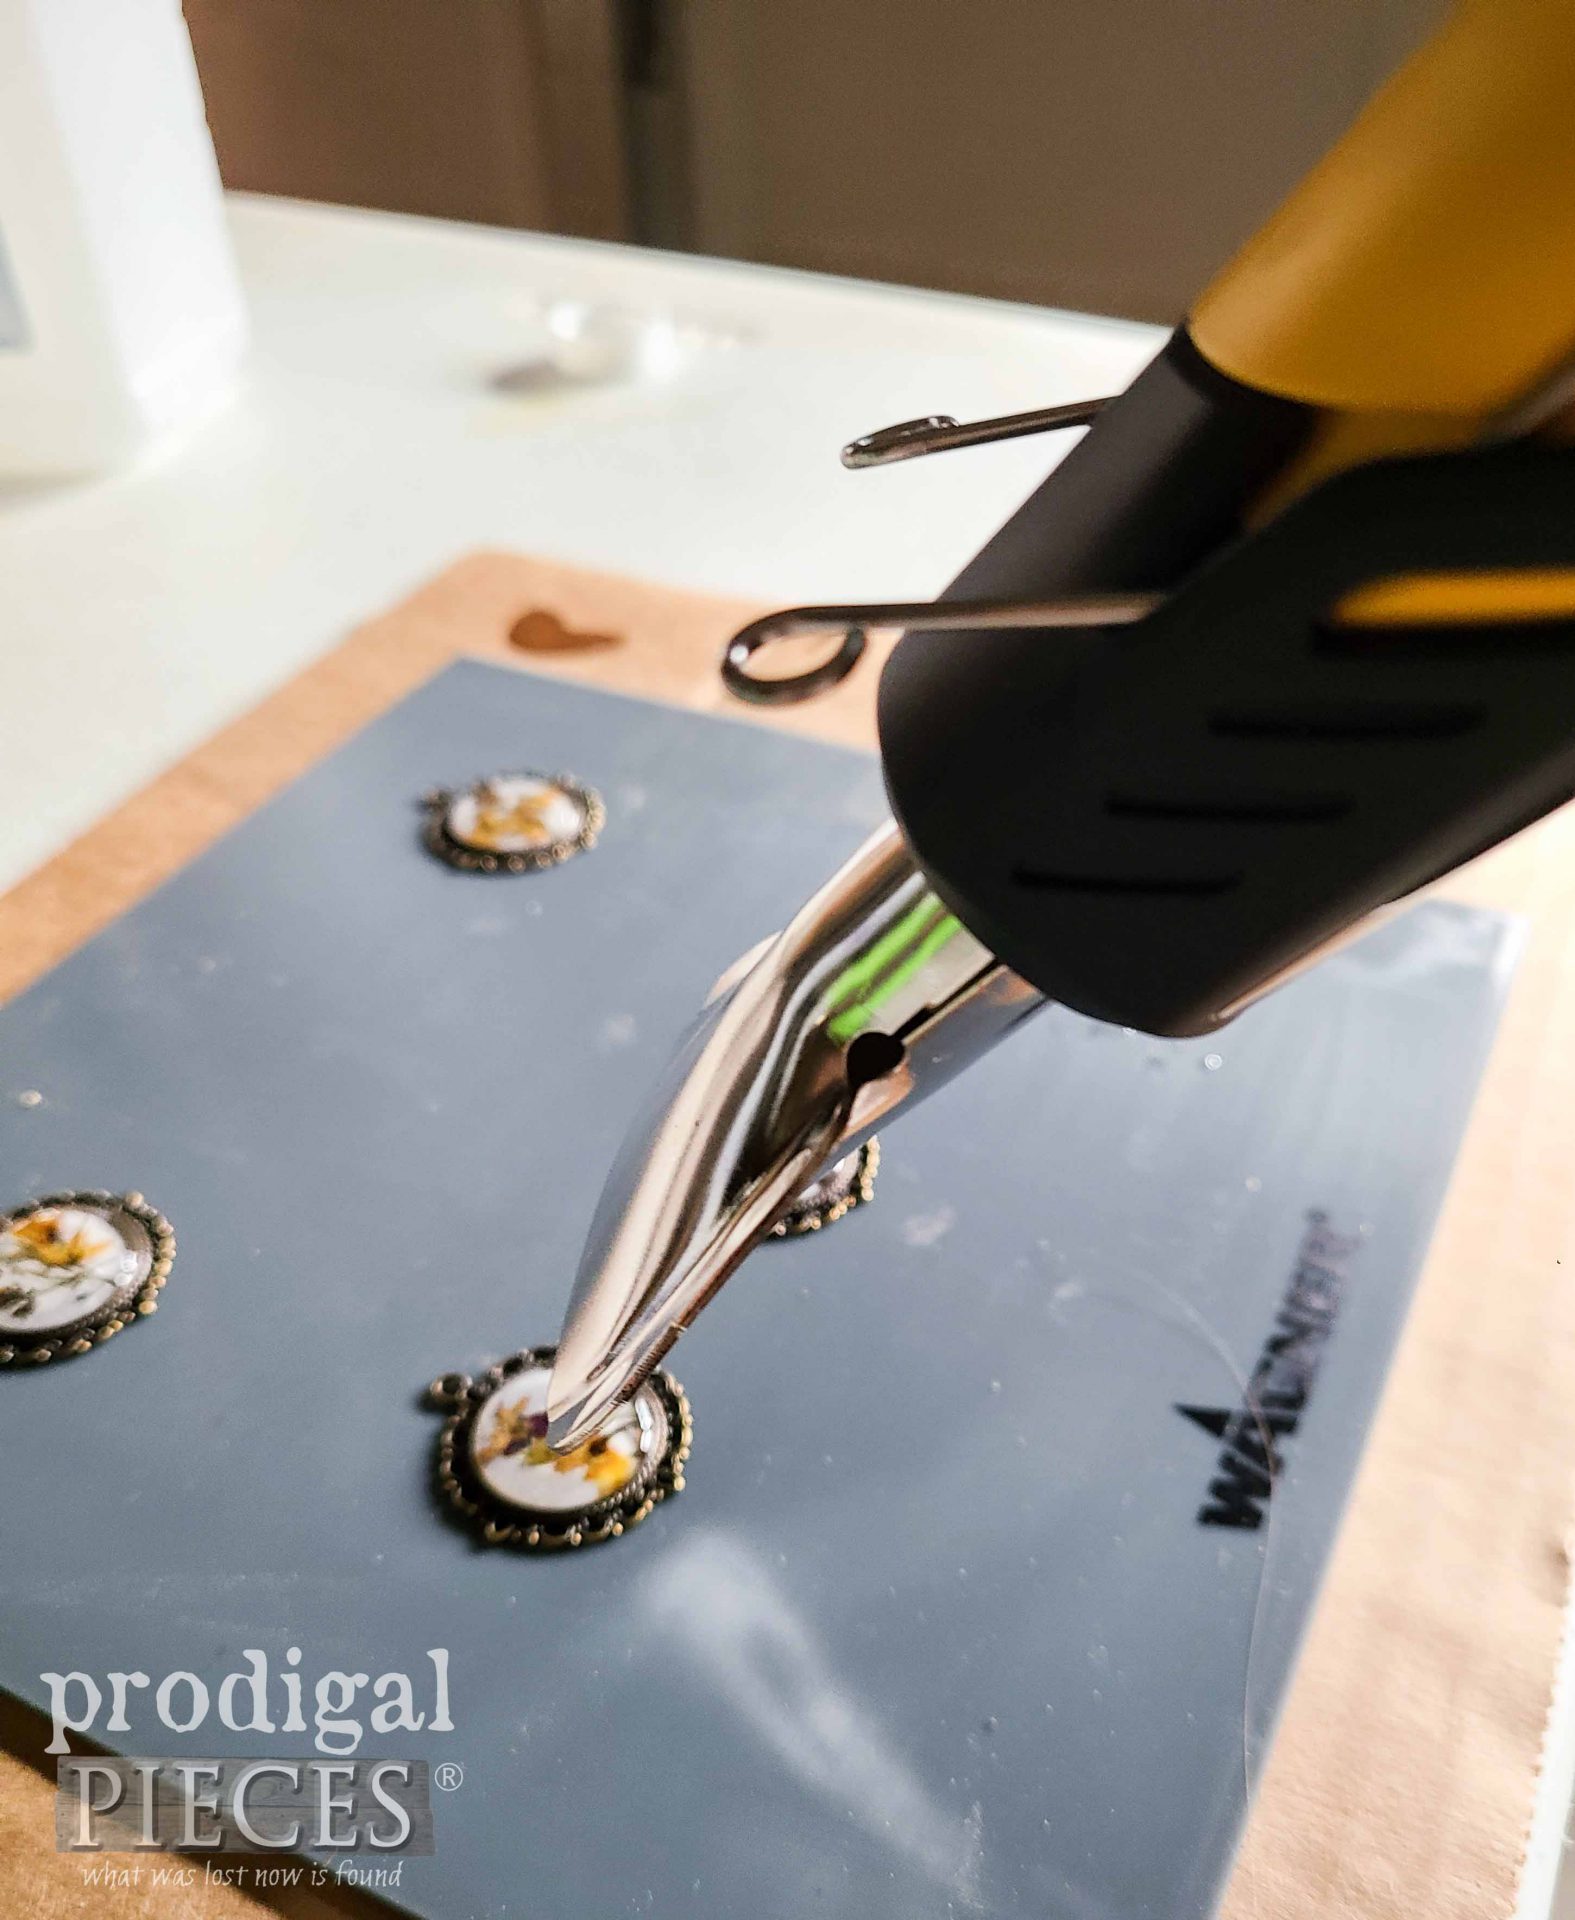 Flare Nozzle on Wagner FURNO Micro Heat Gun for DIY Resin Necklace Pendant by Prodigal Pieces | prodigalpieces.com #prodigalpieces #crafts #diy #home #jewelry